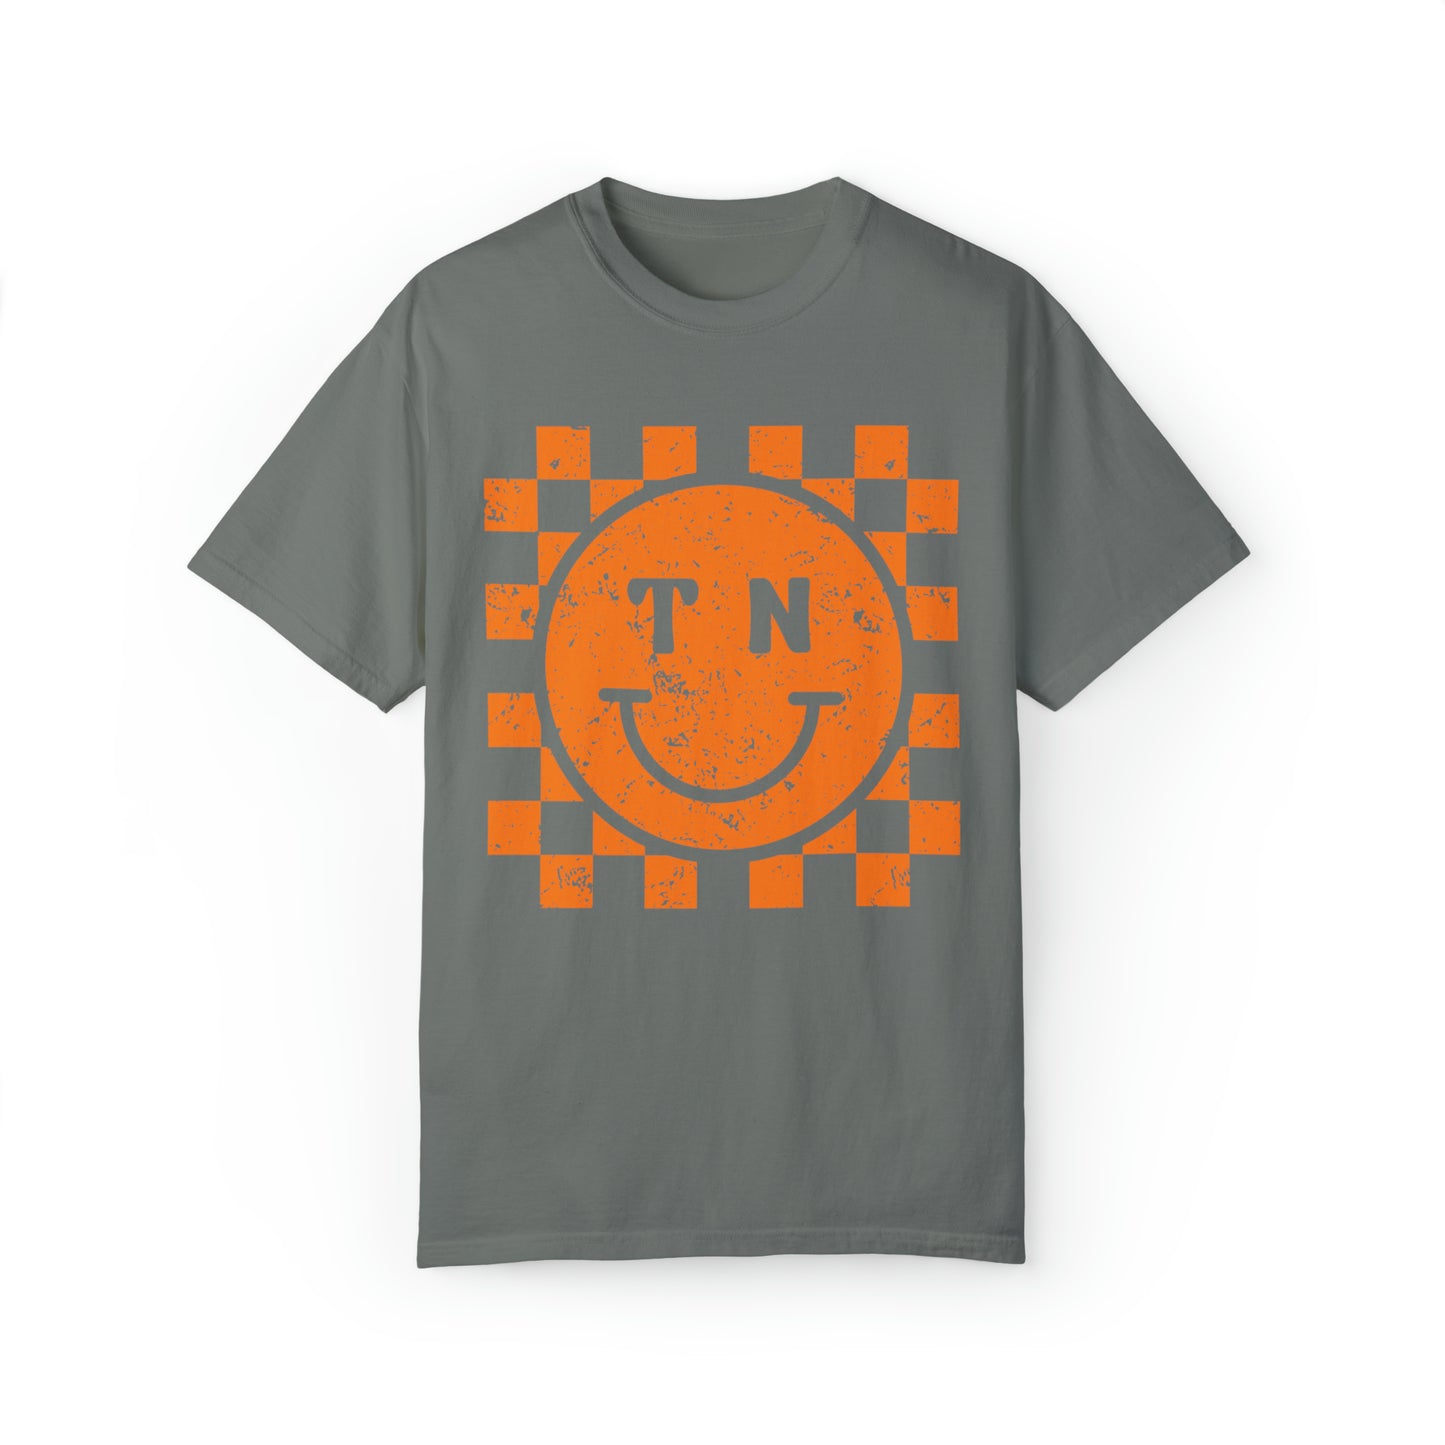 Tennessee Checkered Smiley Face Shirt